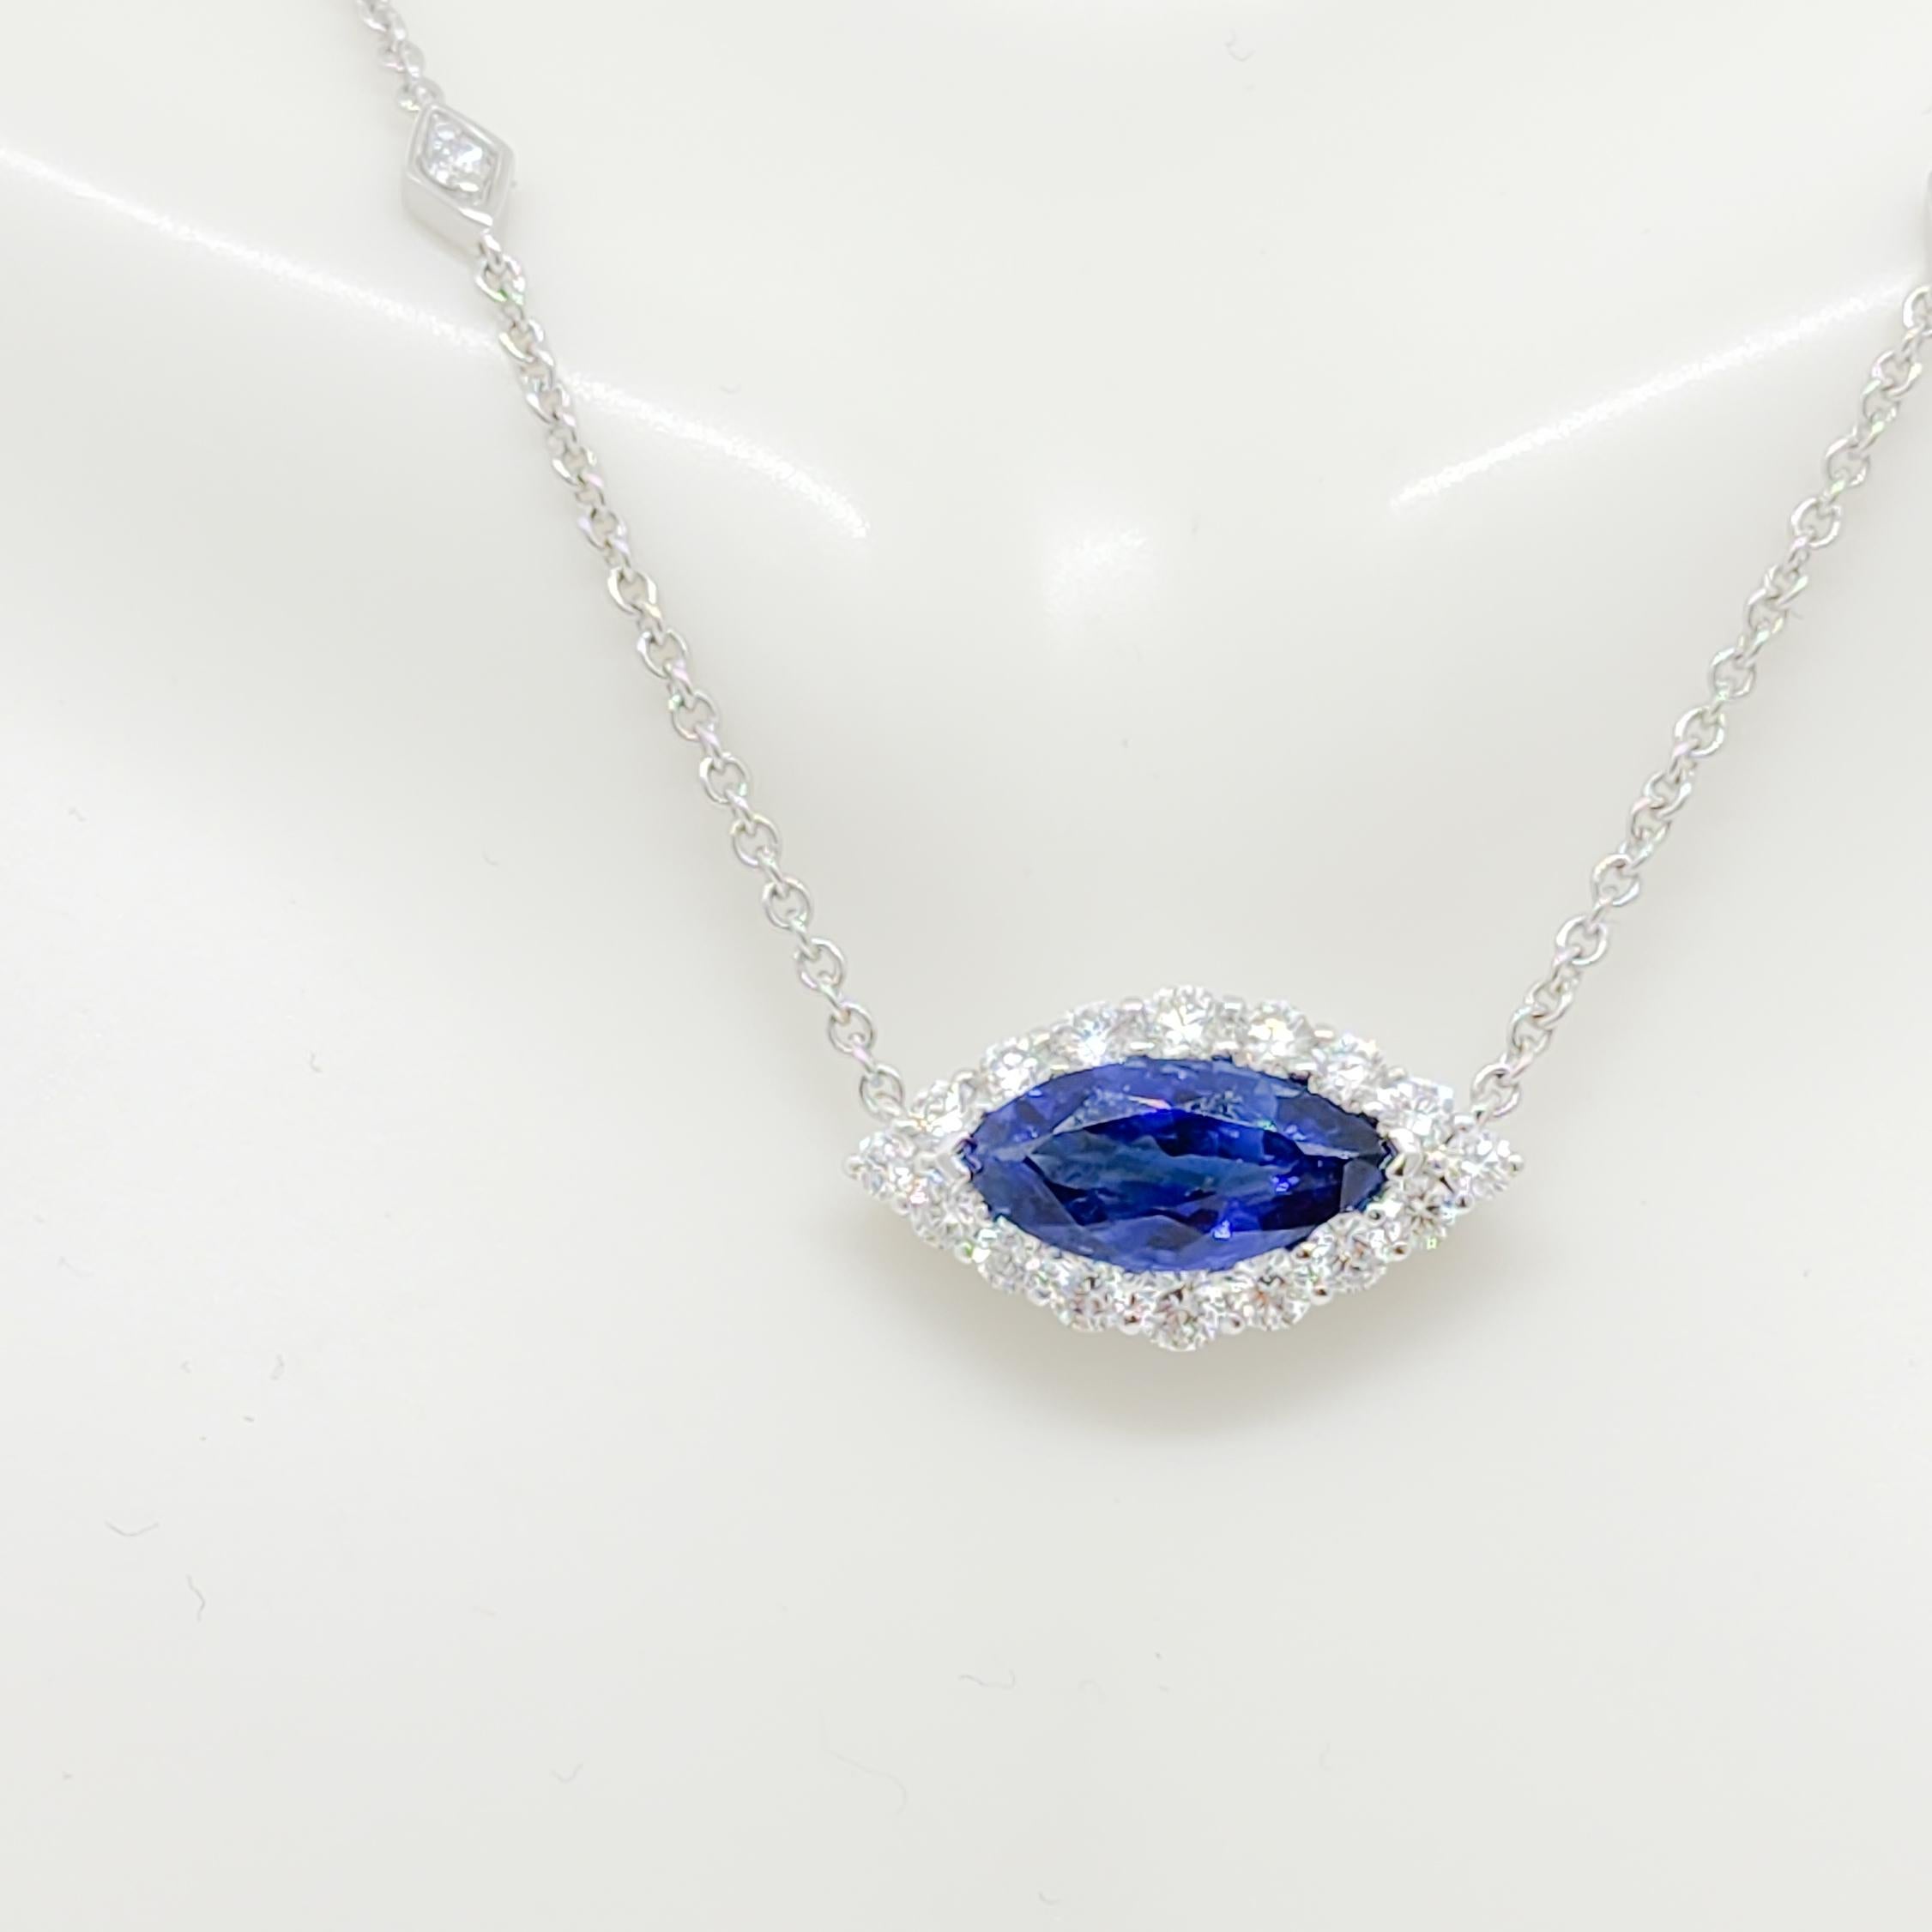 Gorgeous 2.62 ct. blue sapphire marquise with 0.87 ct. good quality white diamond rounds and marquise shapes.  Handmade in 18k white gold.  This necklace is a fun take on the 